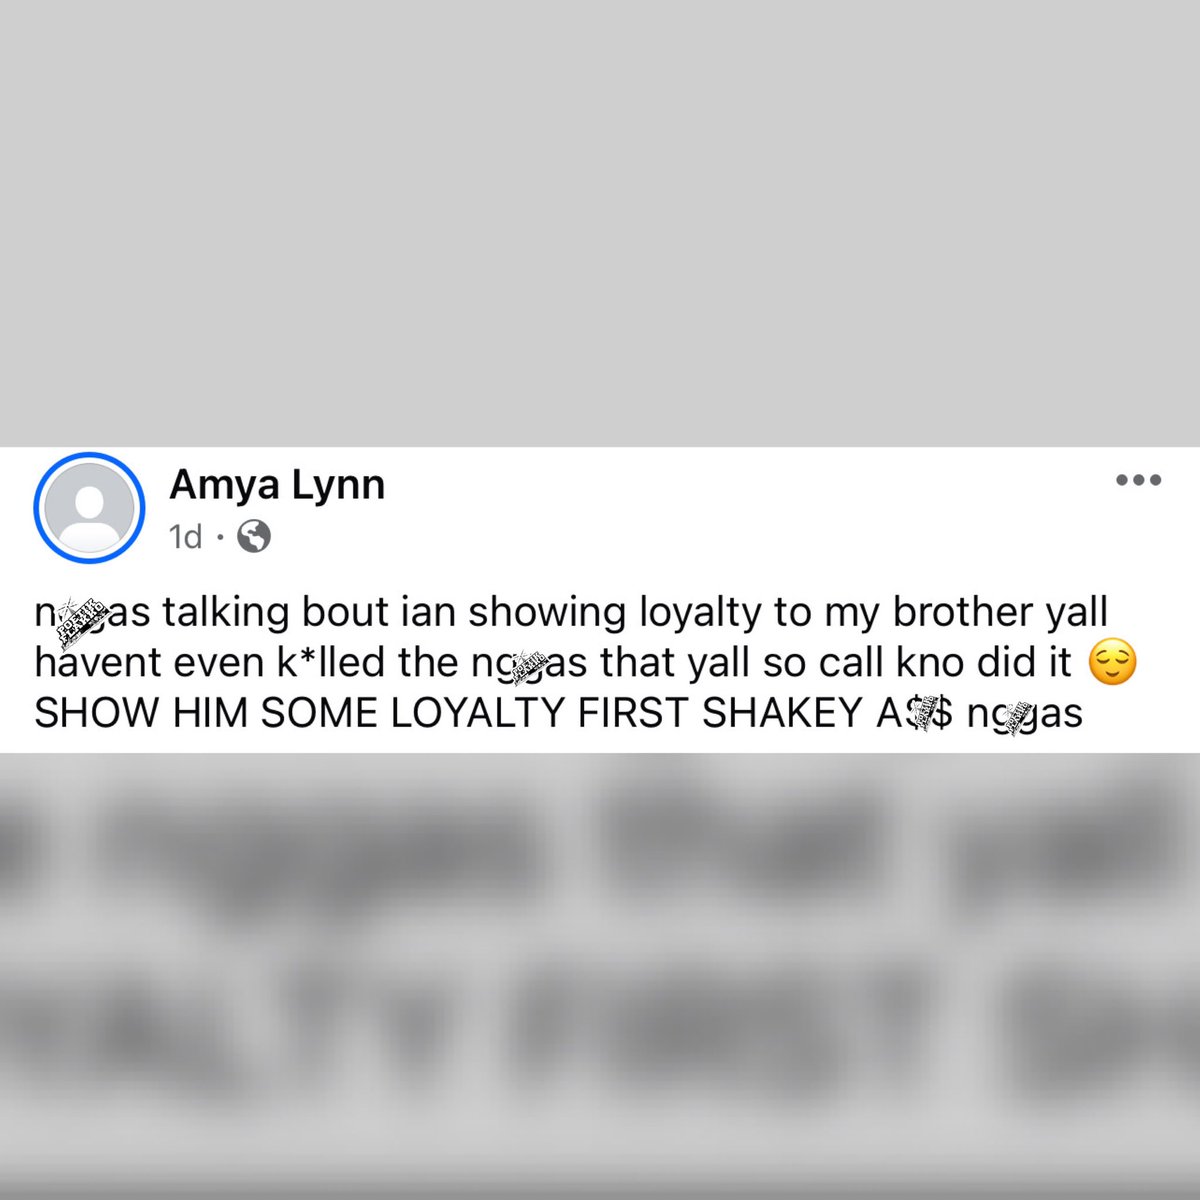 A Girl Says She Doesn’t Owe Her Brother Loyalty After Getting Caught Sleeping Around With The Dude Who Allegedly K*lled Him.